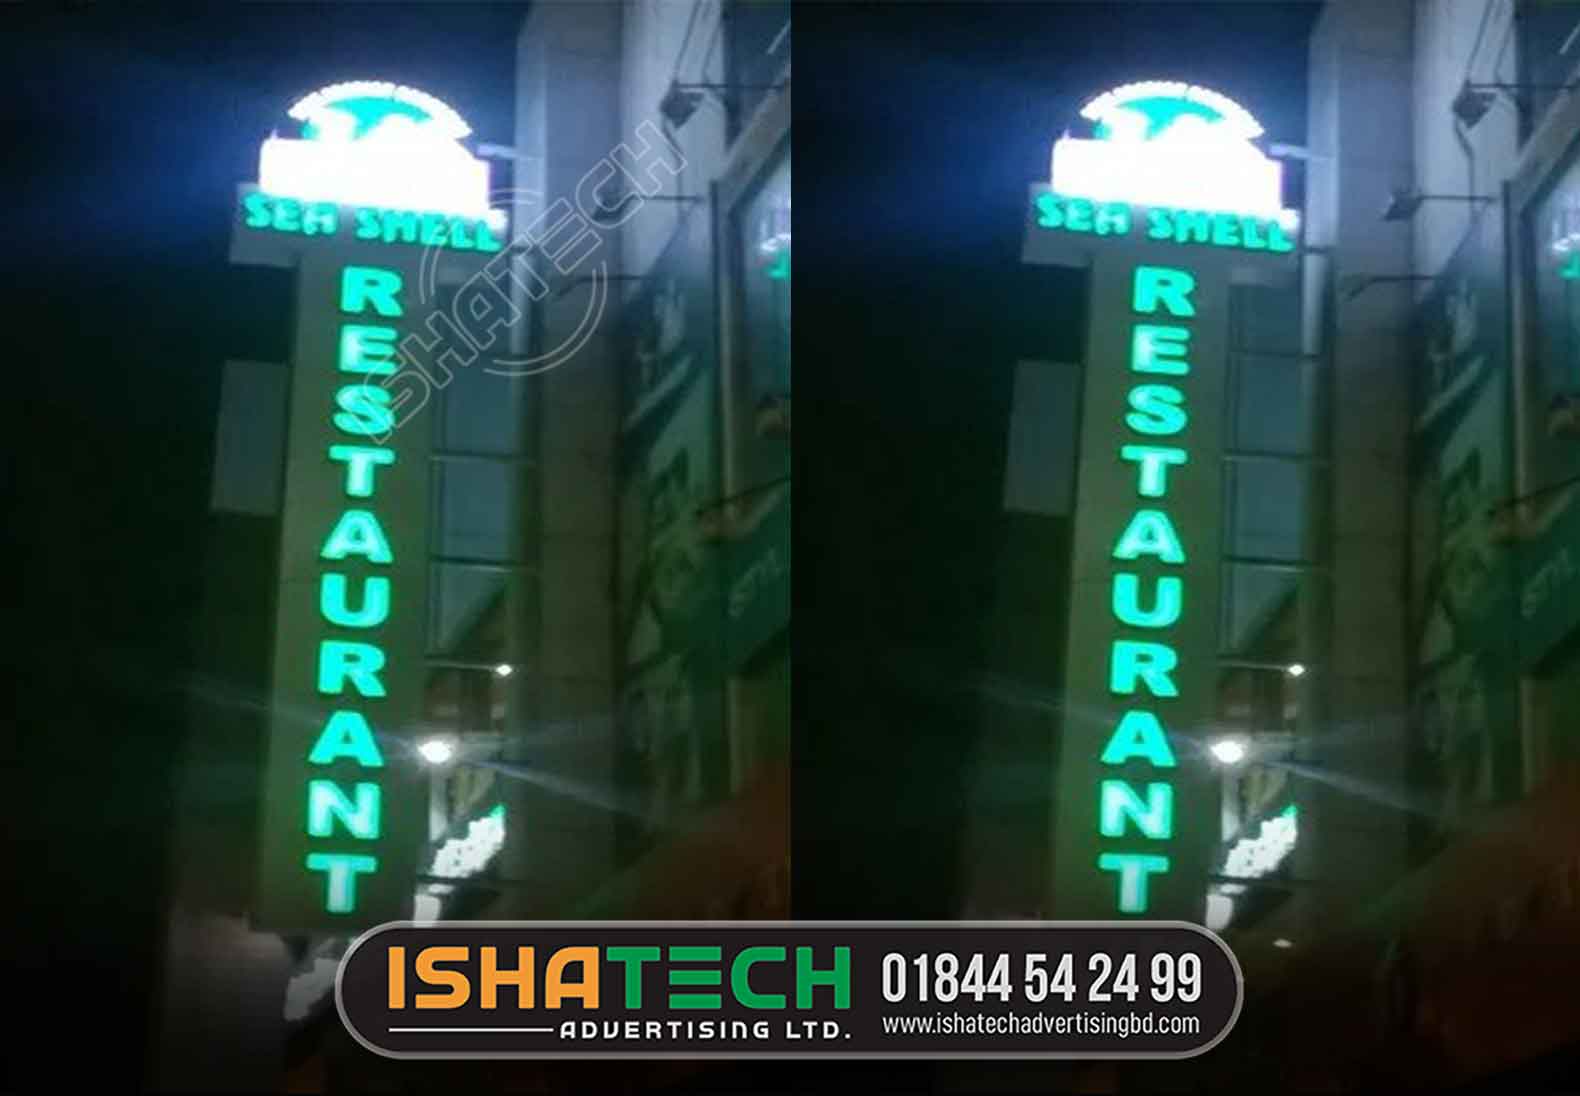 VERTICAL ACRYLIC RESTAURANT LIGHTING LETTER SIGNAGE CREATE BY ISHATECH ADVERTISING LTD, LEADING SIGNBOARD MAKING AND MANUFACTURER COMPANY IN BANGLADESH